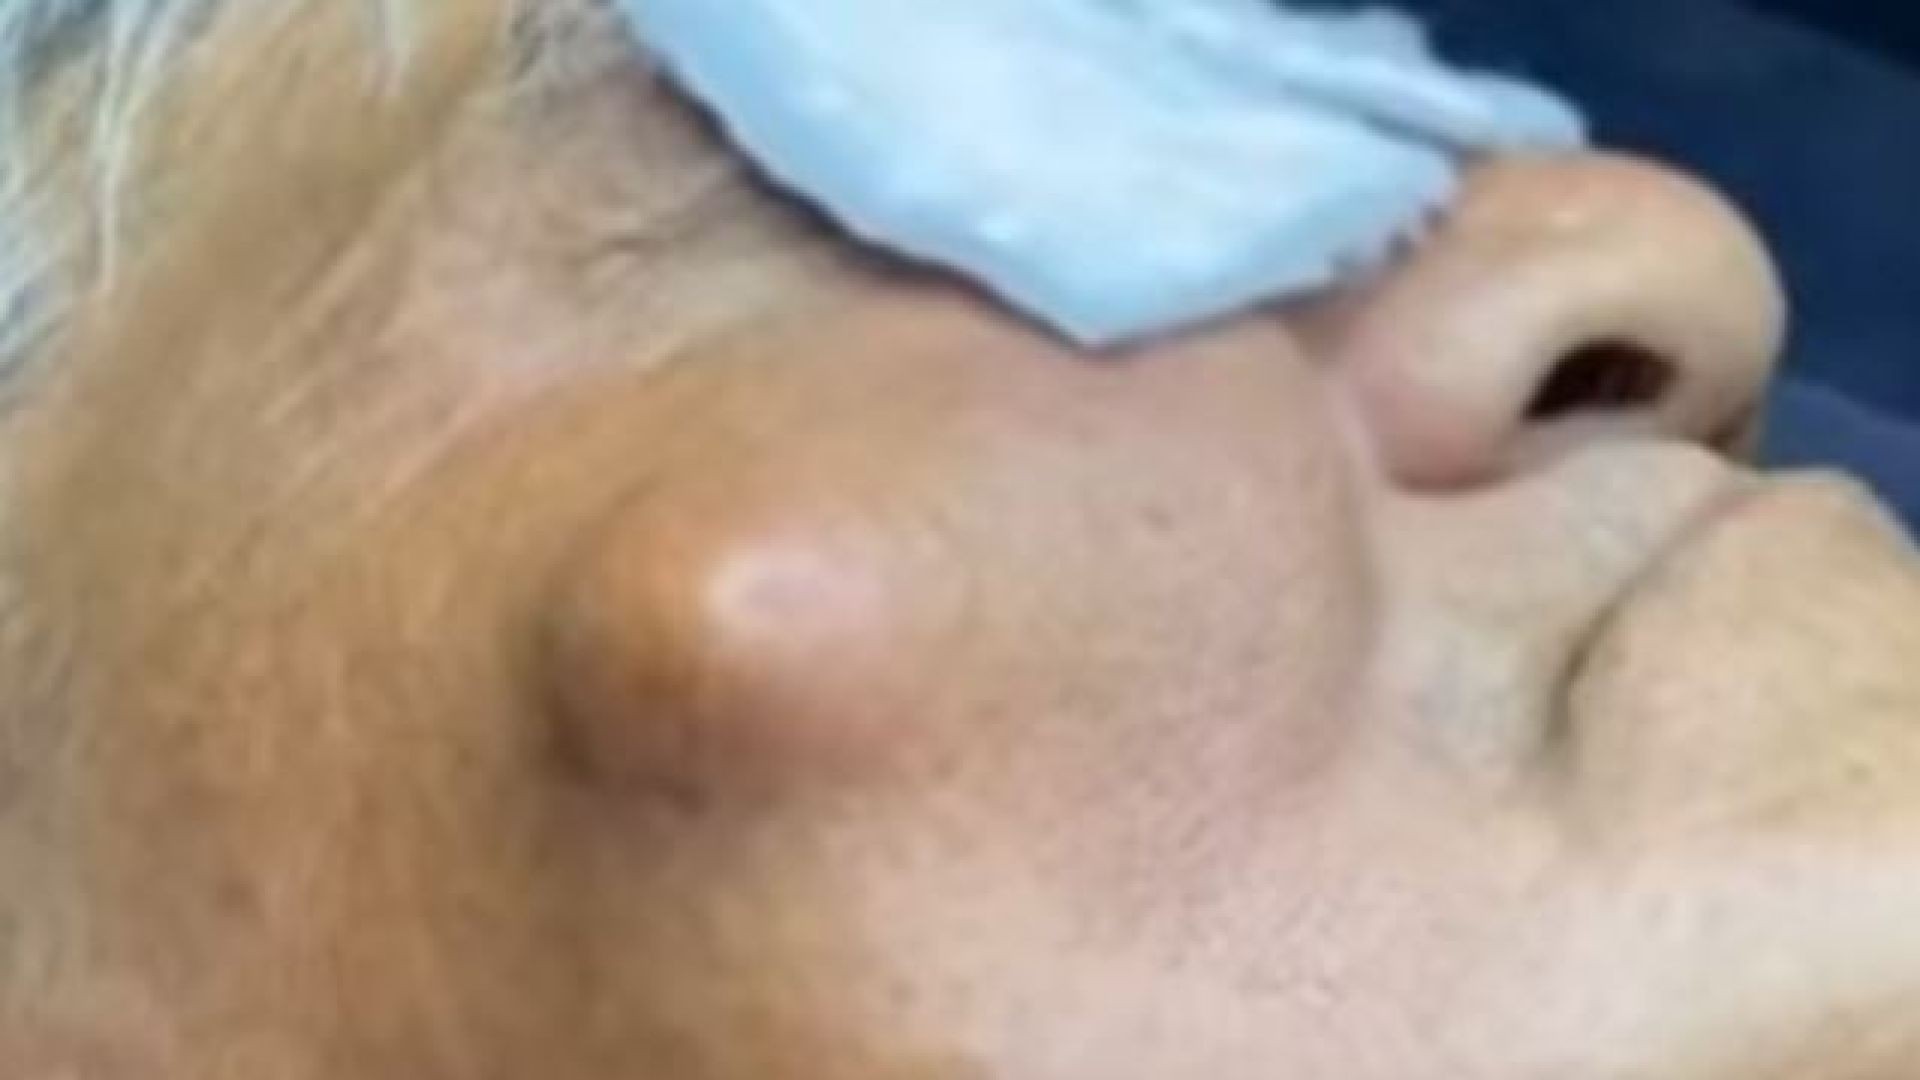 You have to see the size of the cyst on the face! 😮